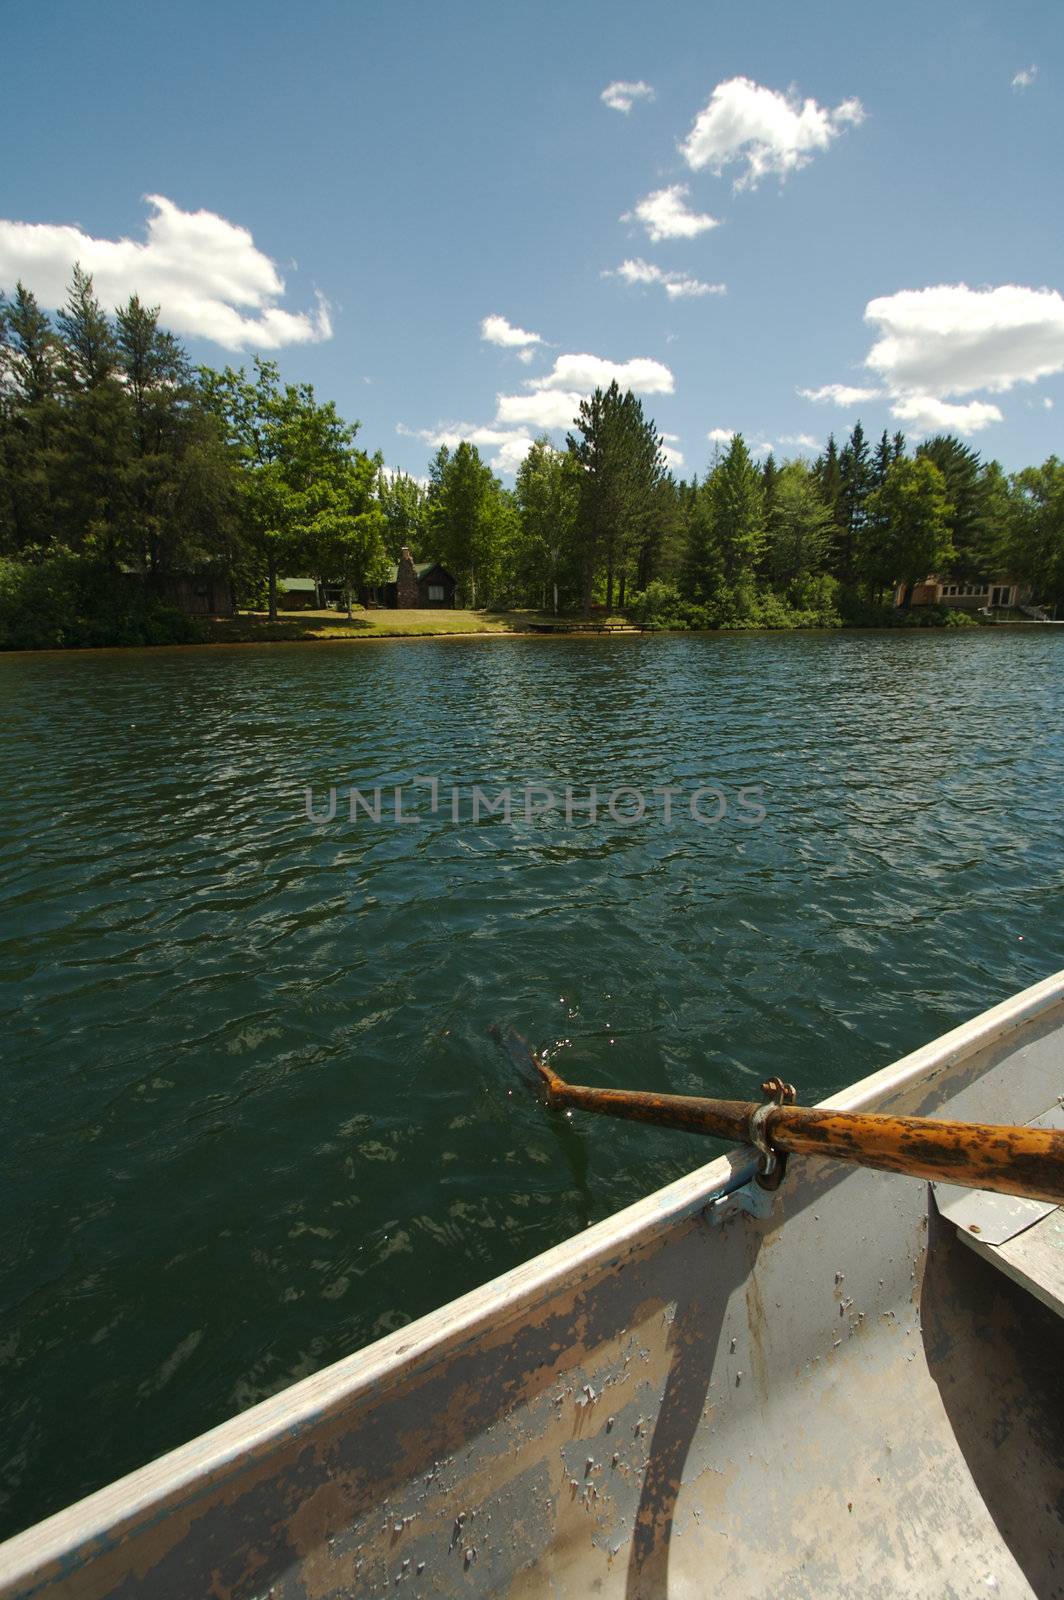 Lake Scene in a Rowboat by Feverpitched